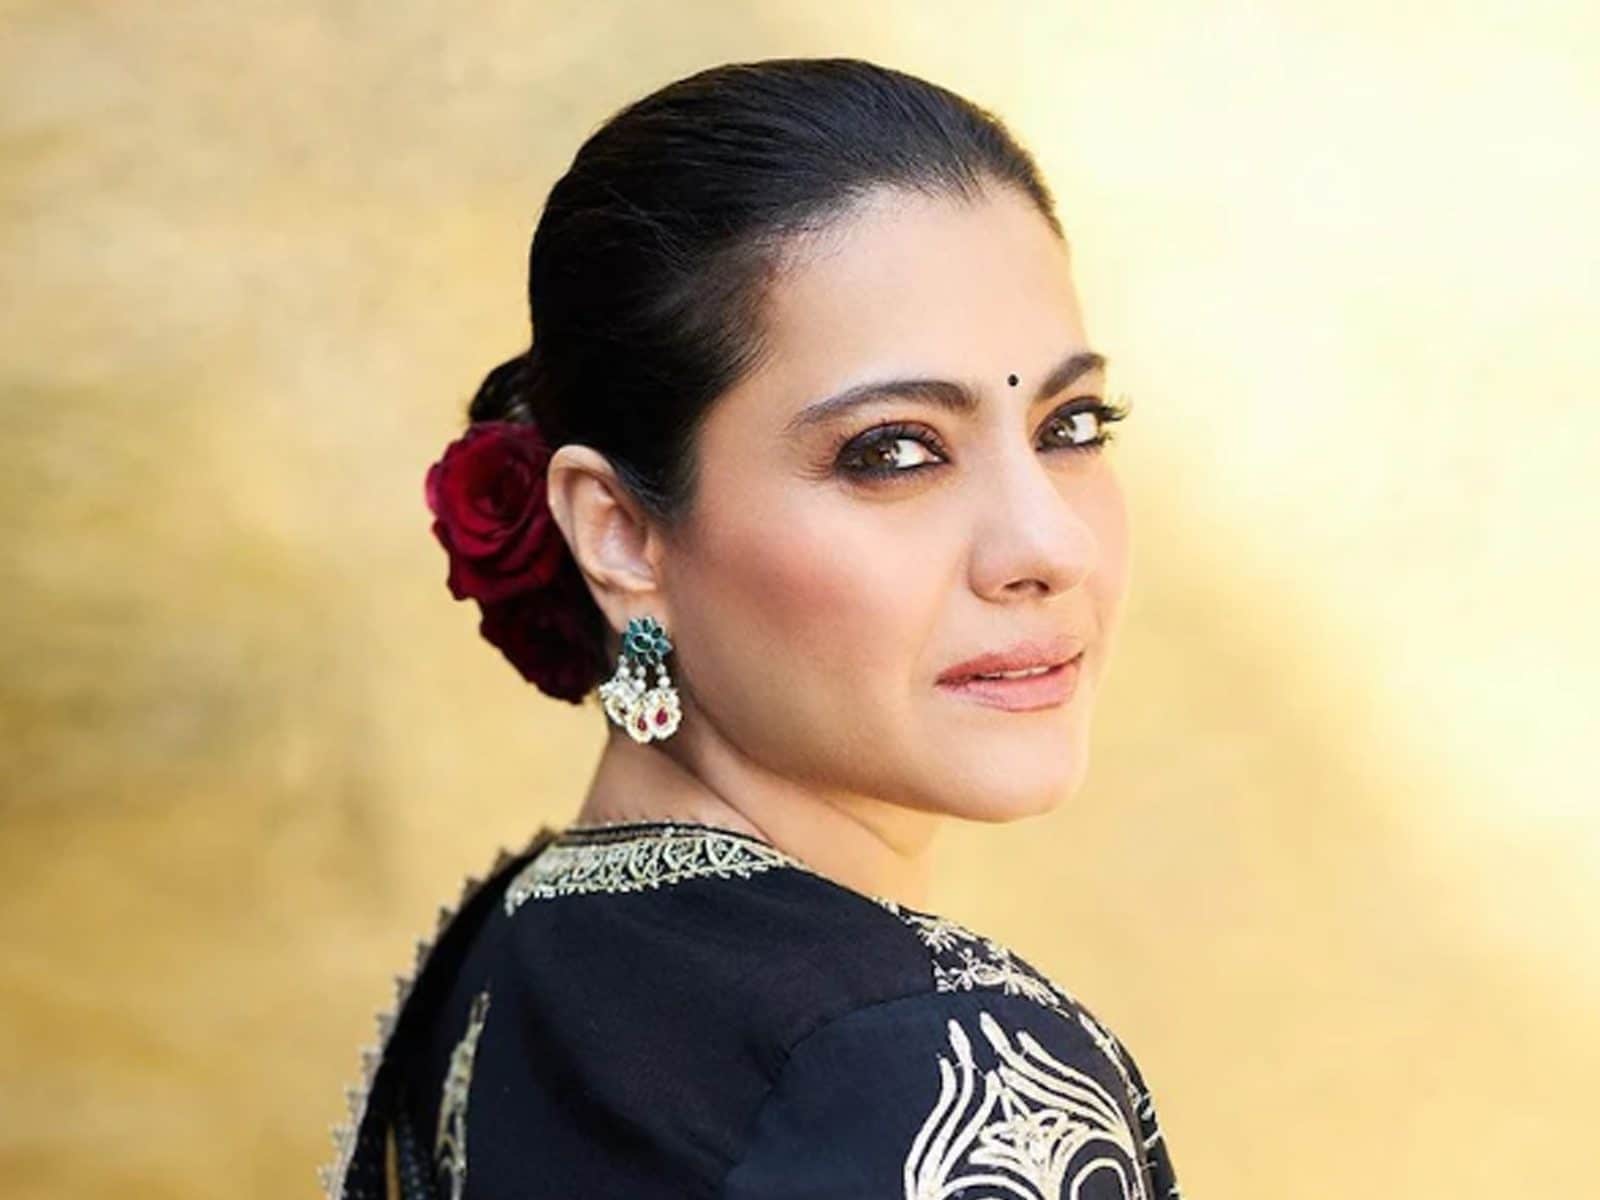 Kajol Indian Actress Naked - Kajol Ups The Glam Quotient With Her All-Black Desi Avatar - News18